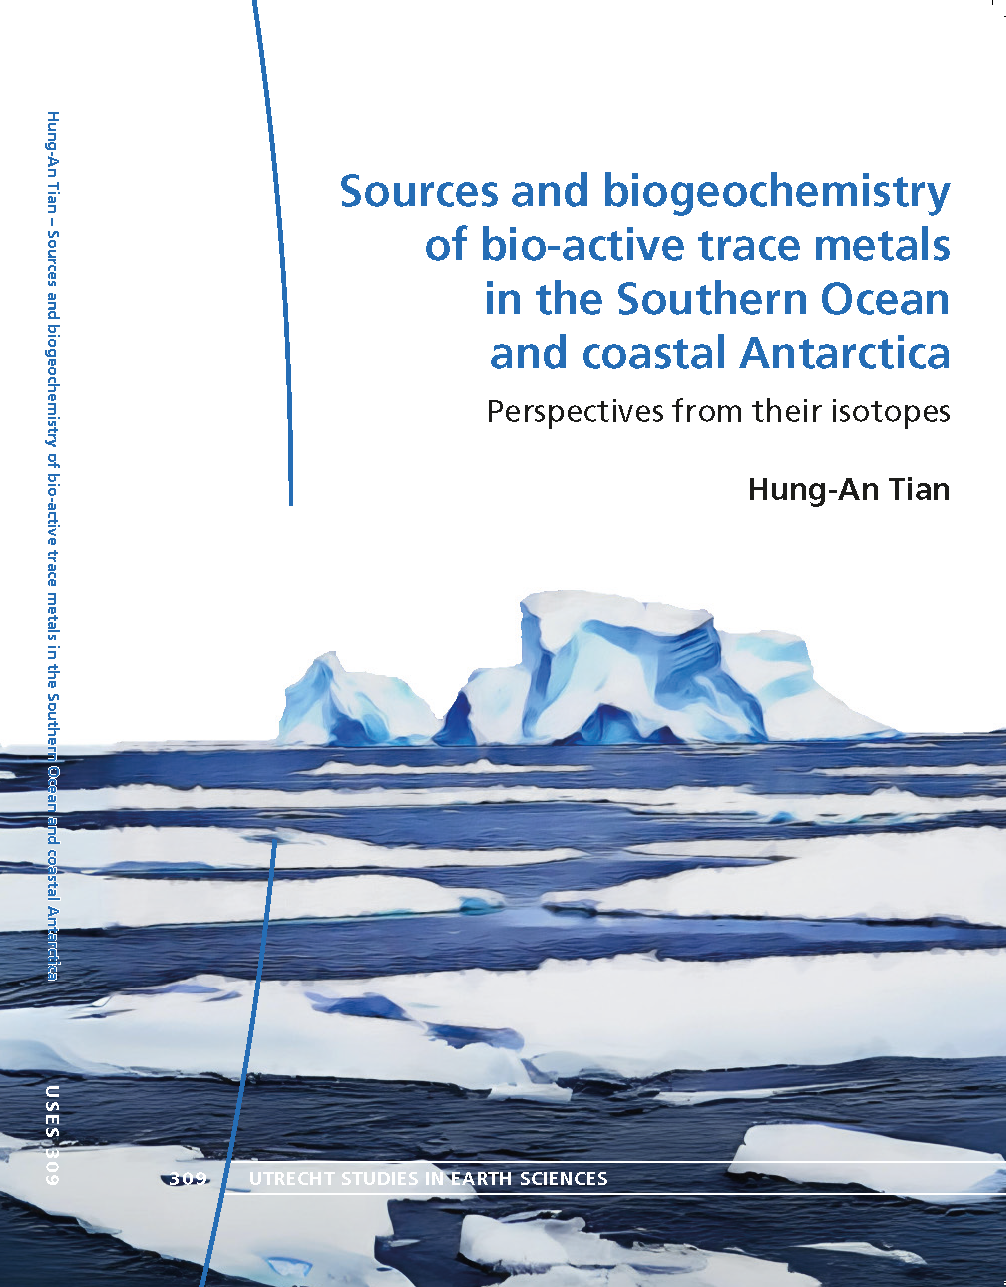 Dissertation cover of Hung-An Tian: Sources and biogeochemistry of bio-active trace metals in the Southern Ocean and coastal Antarctica